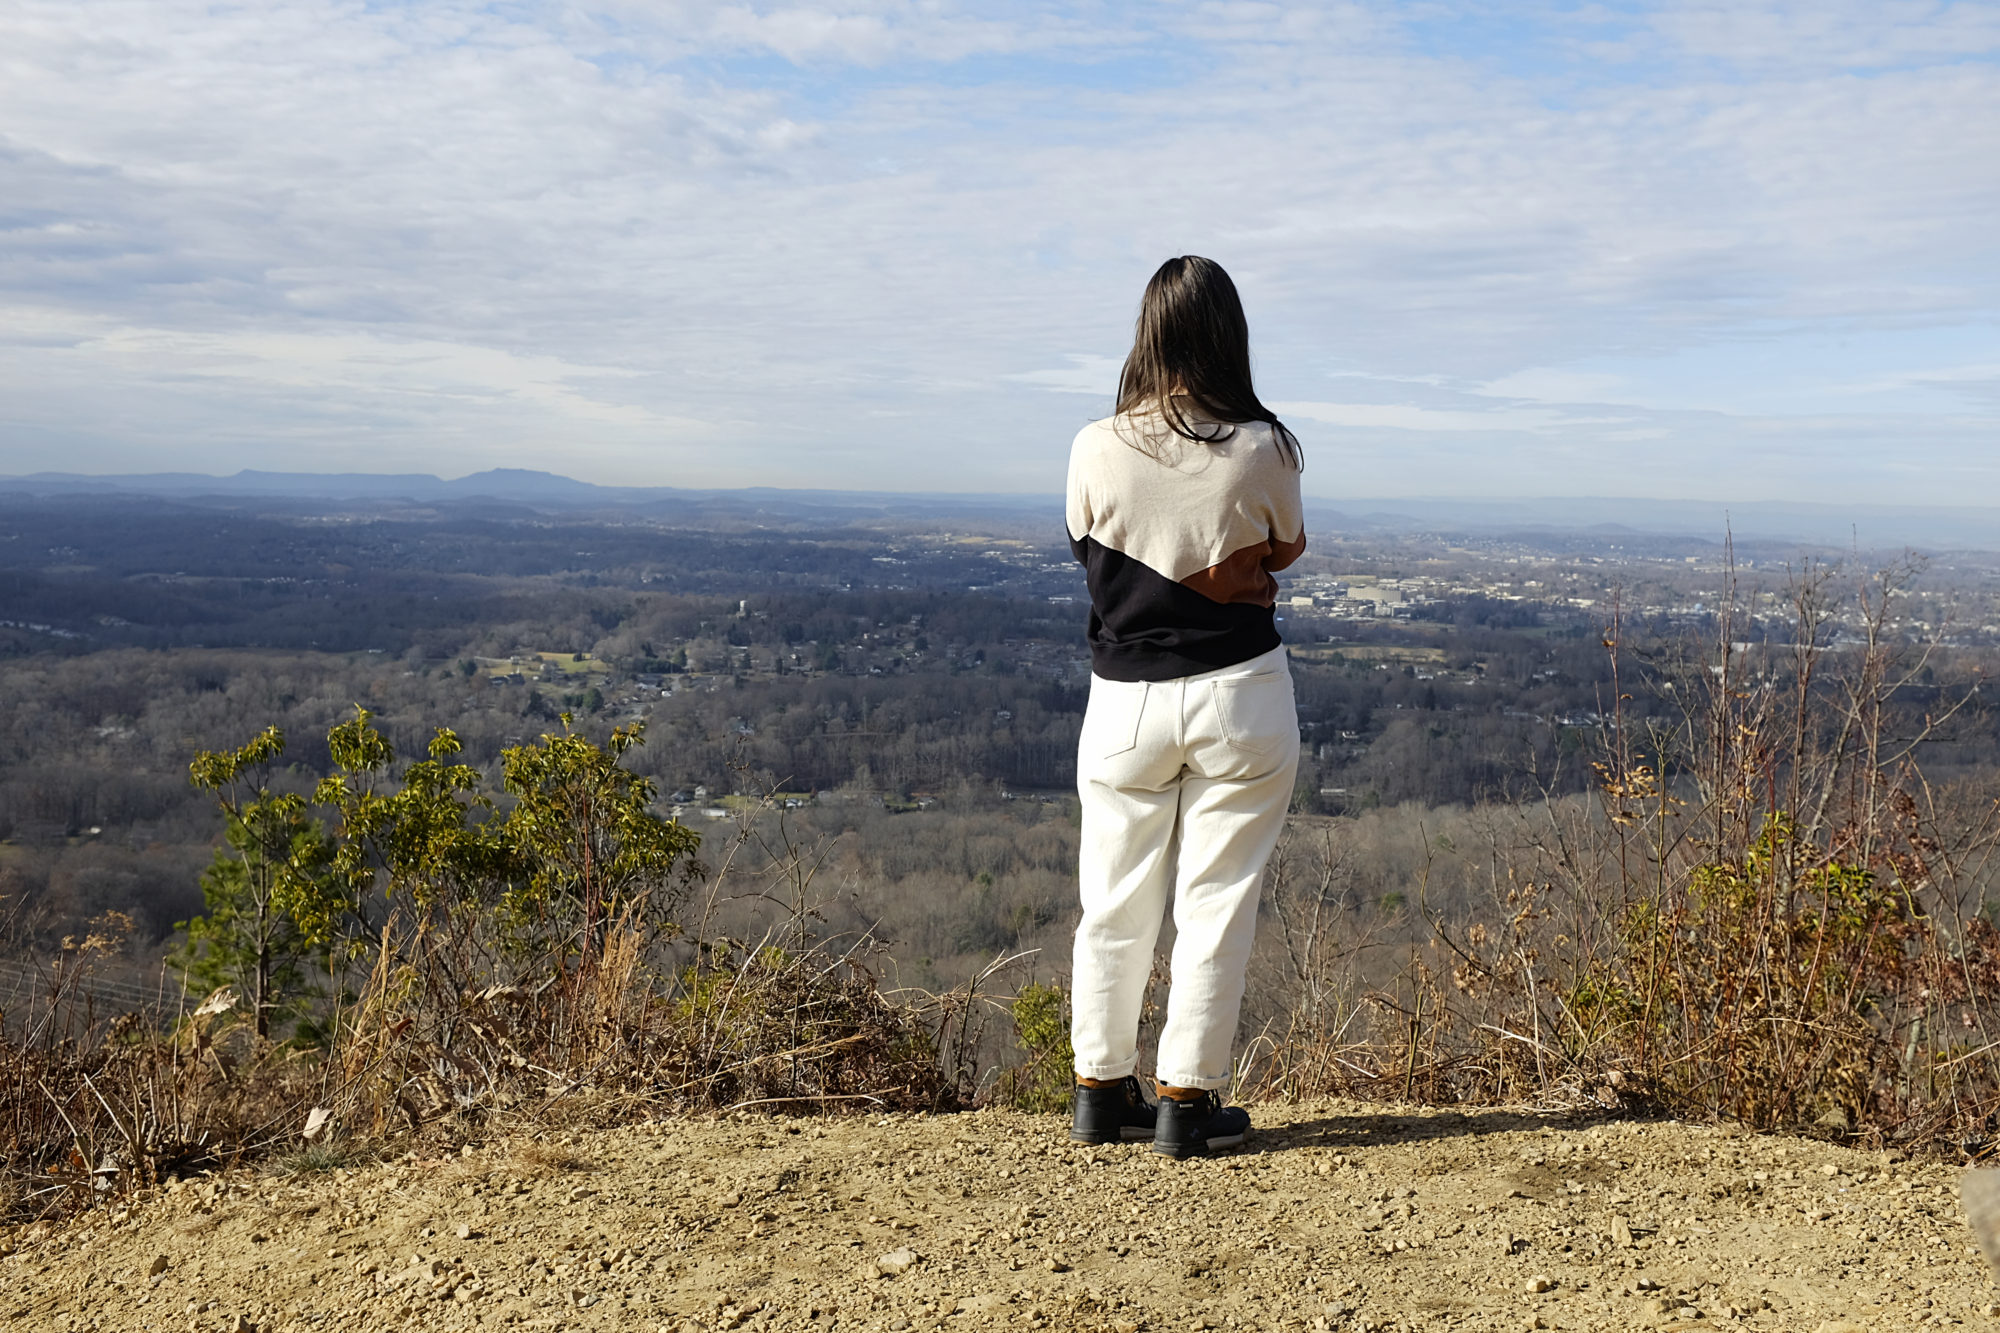 Alyssa looks out over Johnson City in her hiking clothes